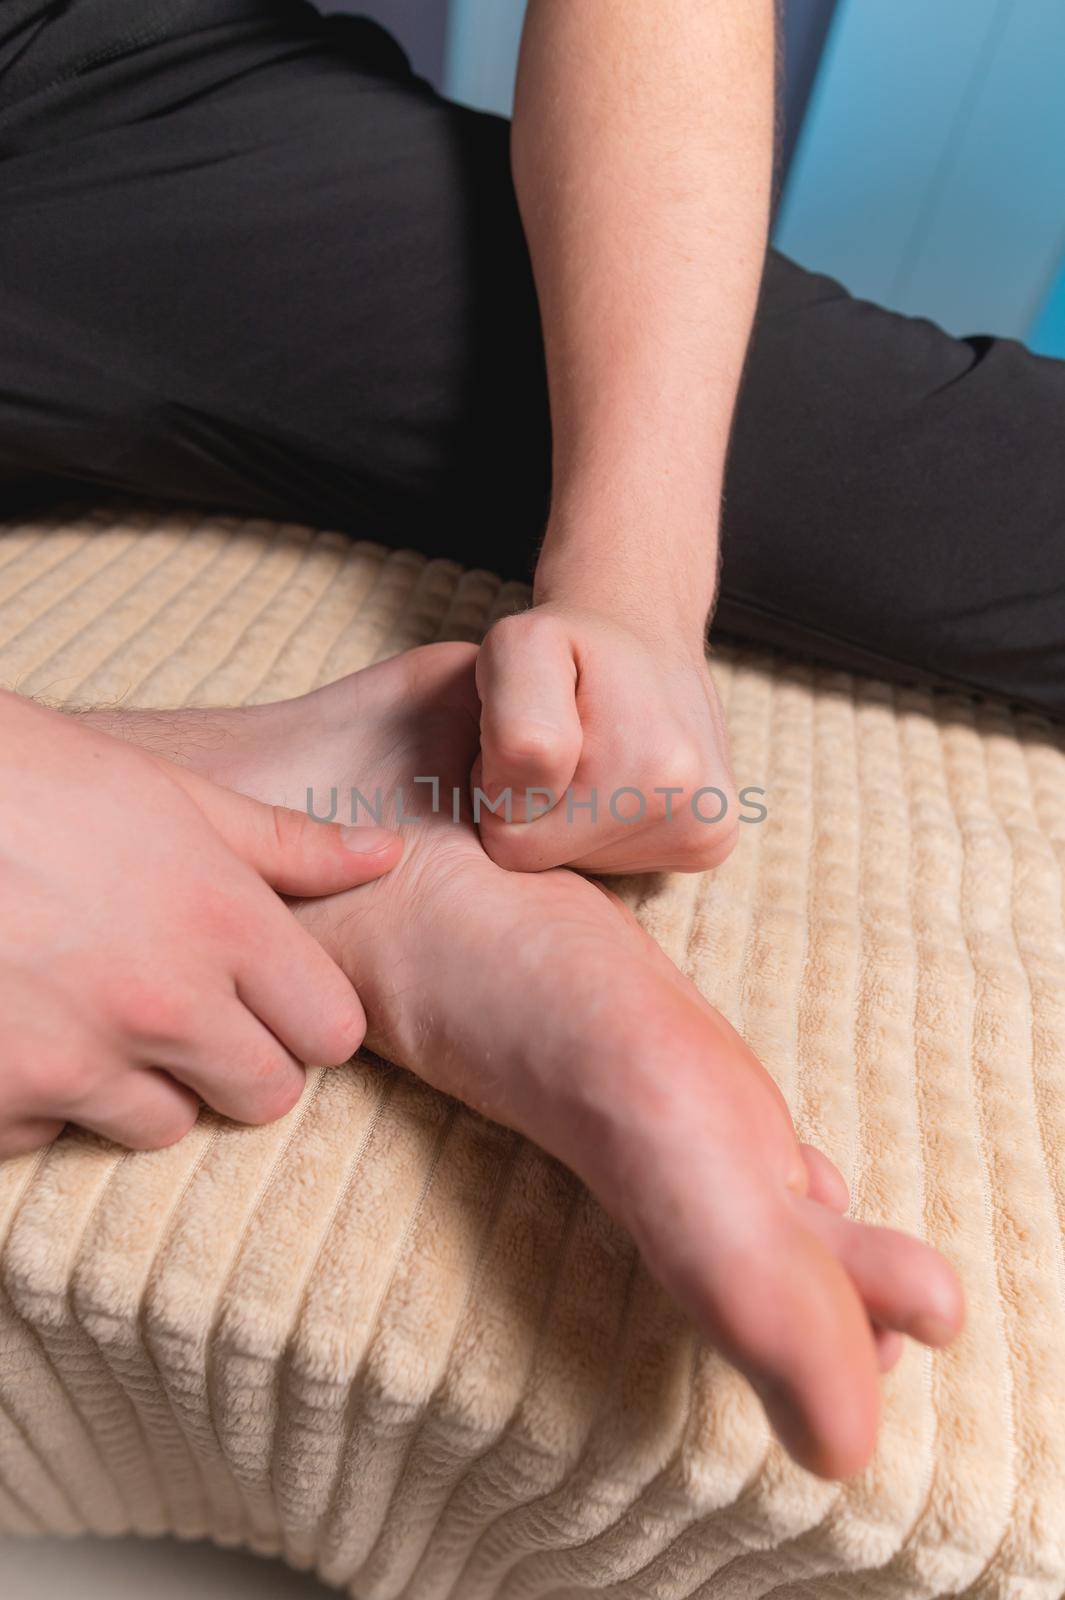 A man sitting on a massage table does self-massage of his feet with his own hands.